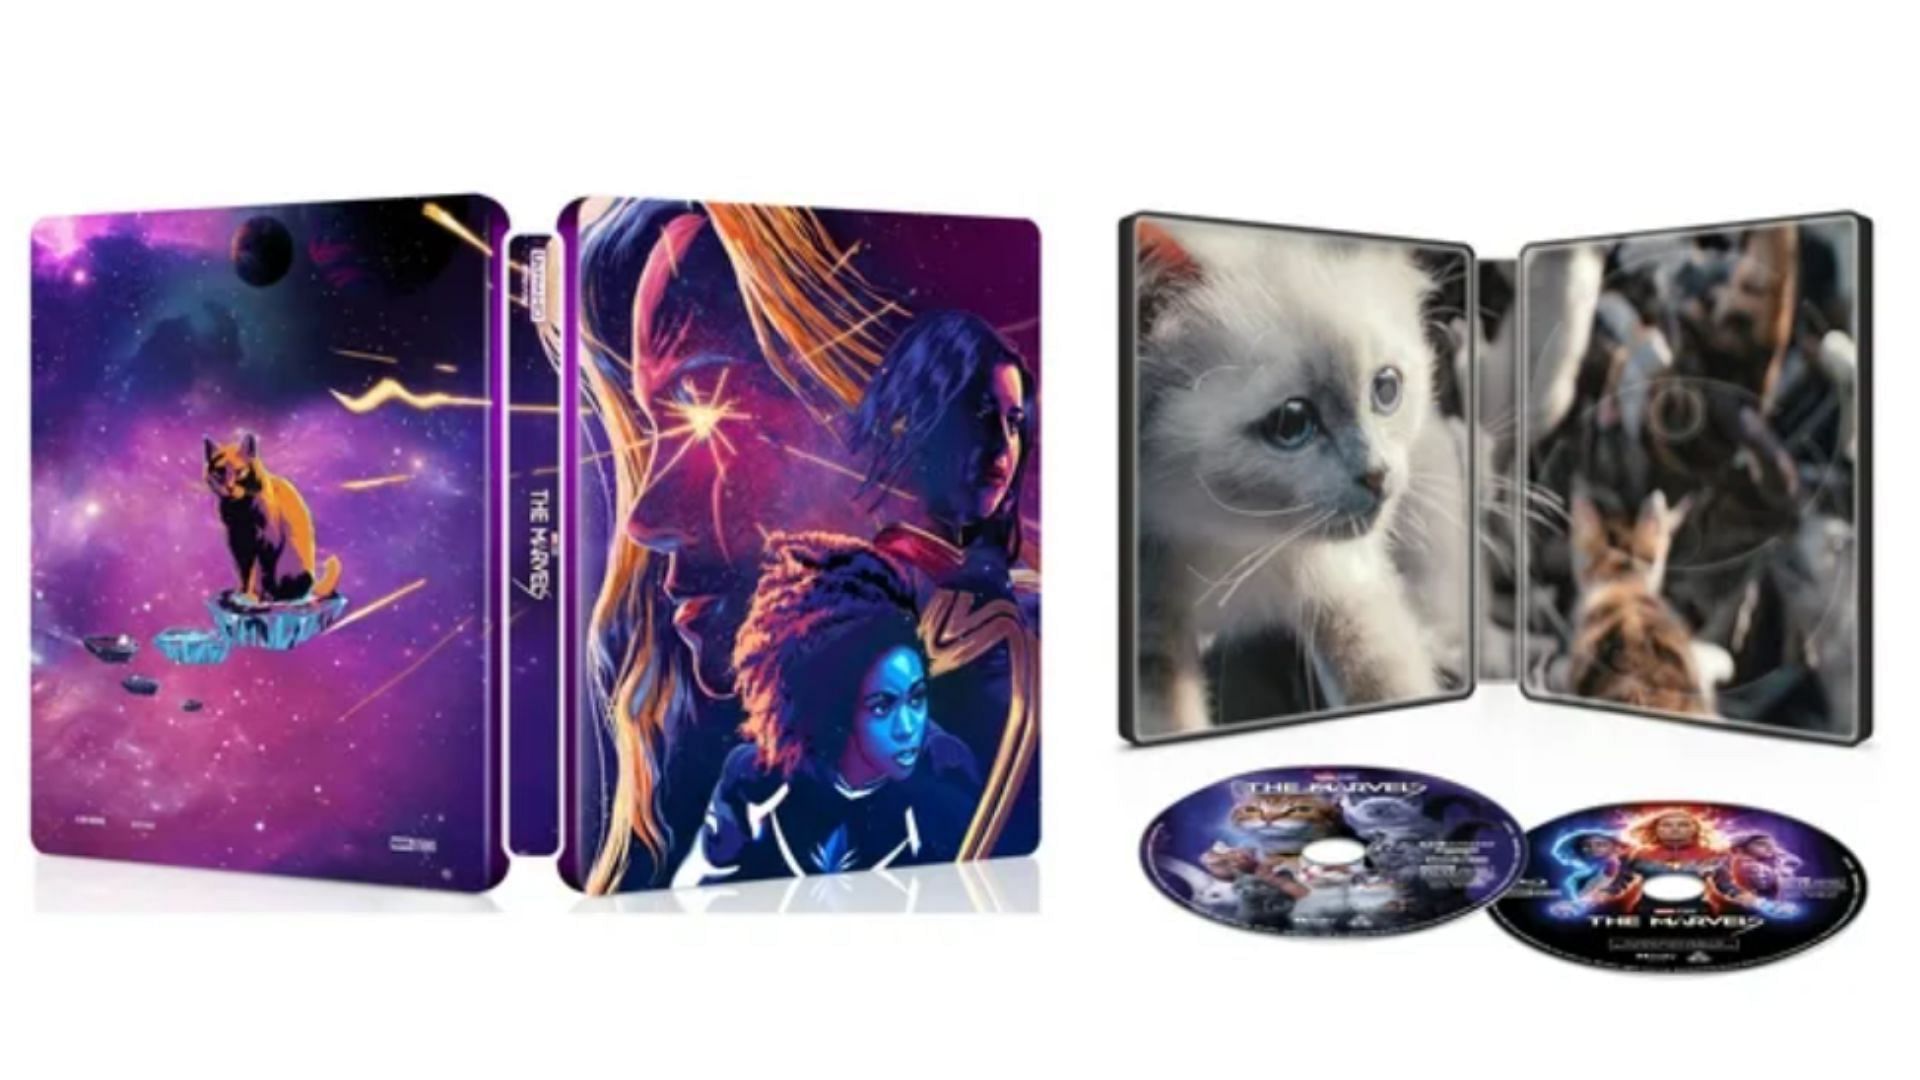 The Steelbooks offer more than the movie (Image via Walmart)